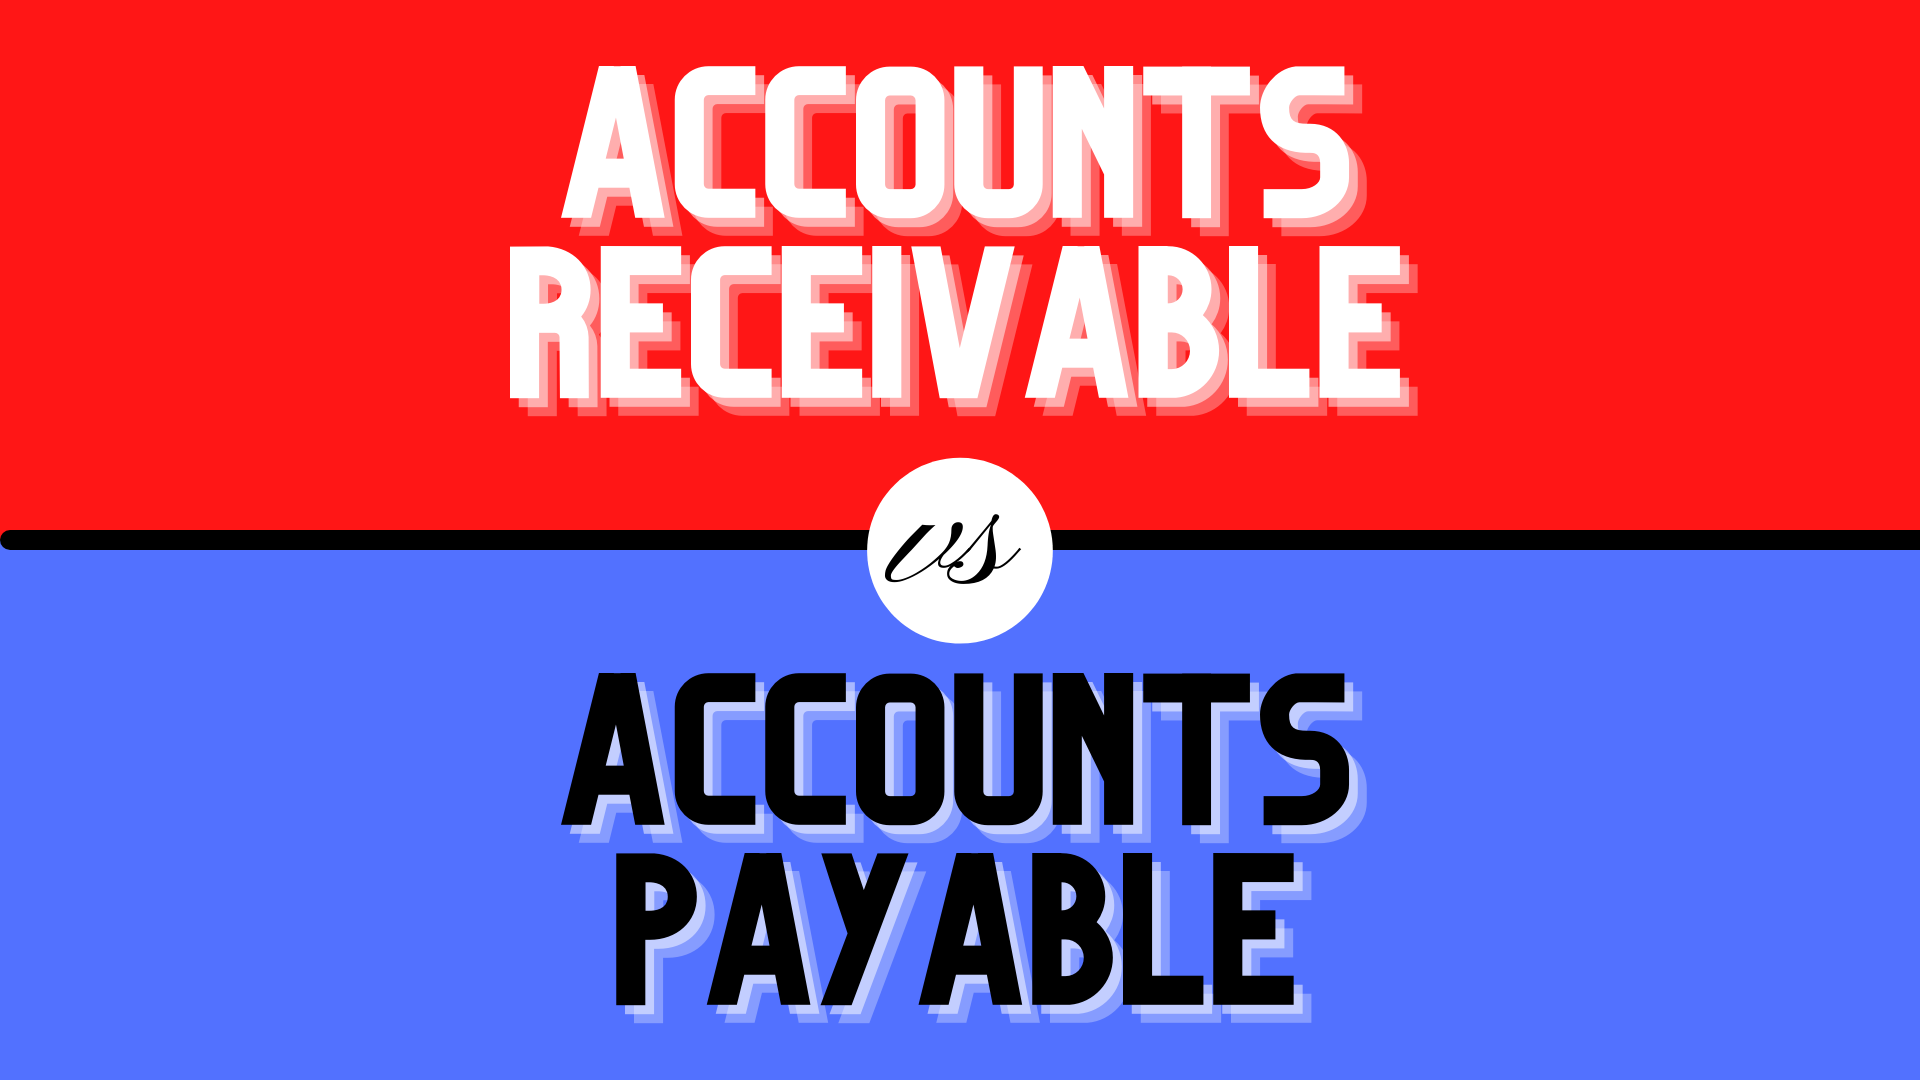 Accounts Receivable Vs Accounts Payable What s The Difference 1Accounts